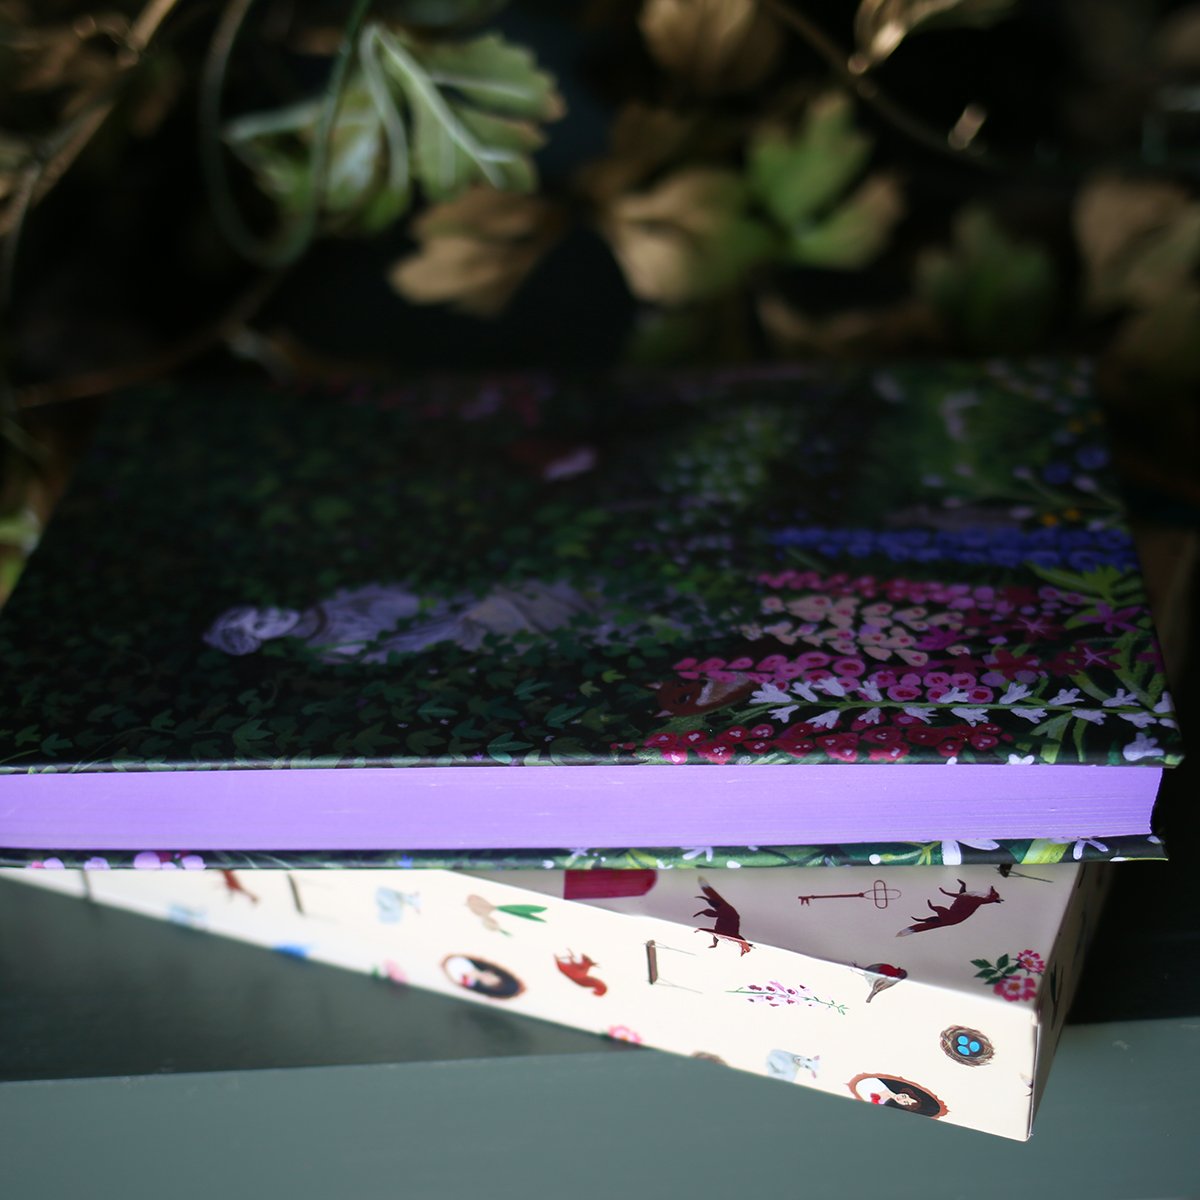 The Secret Garden special edition with a custom slipcase and illustrations with garden aesthetic and purple stained edges